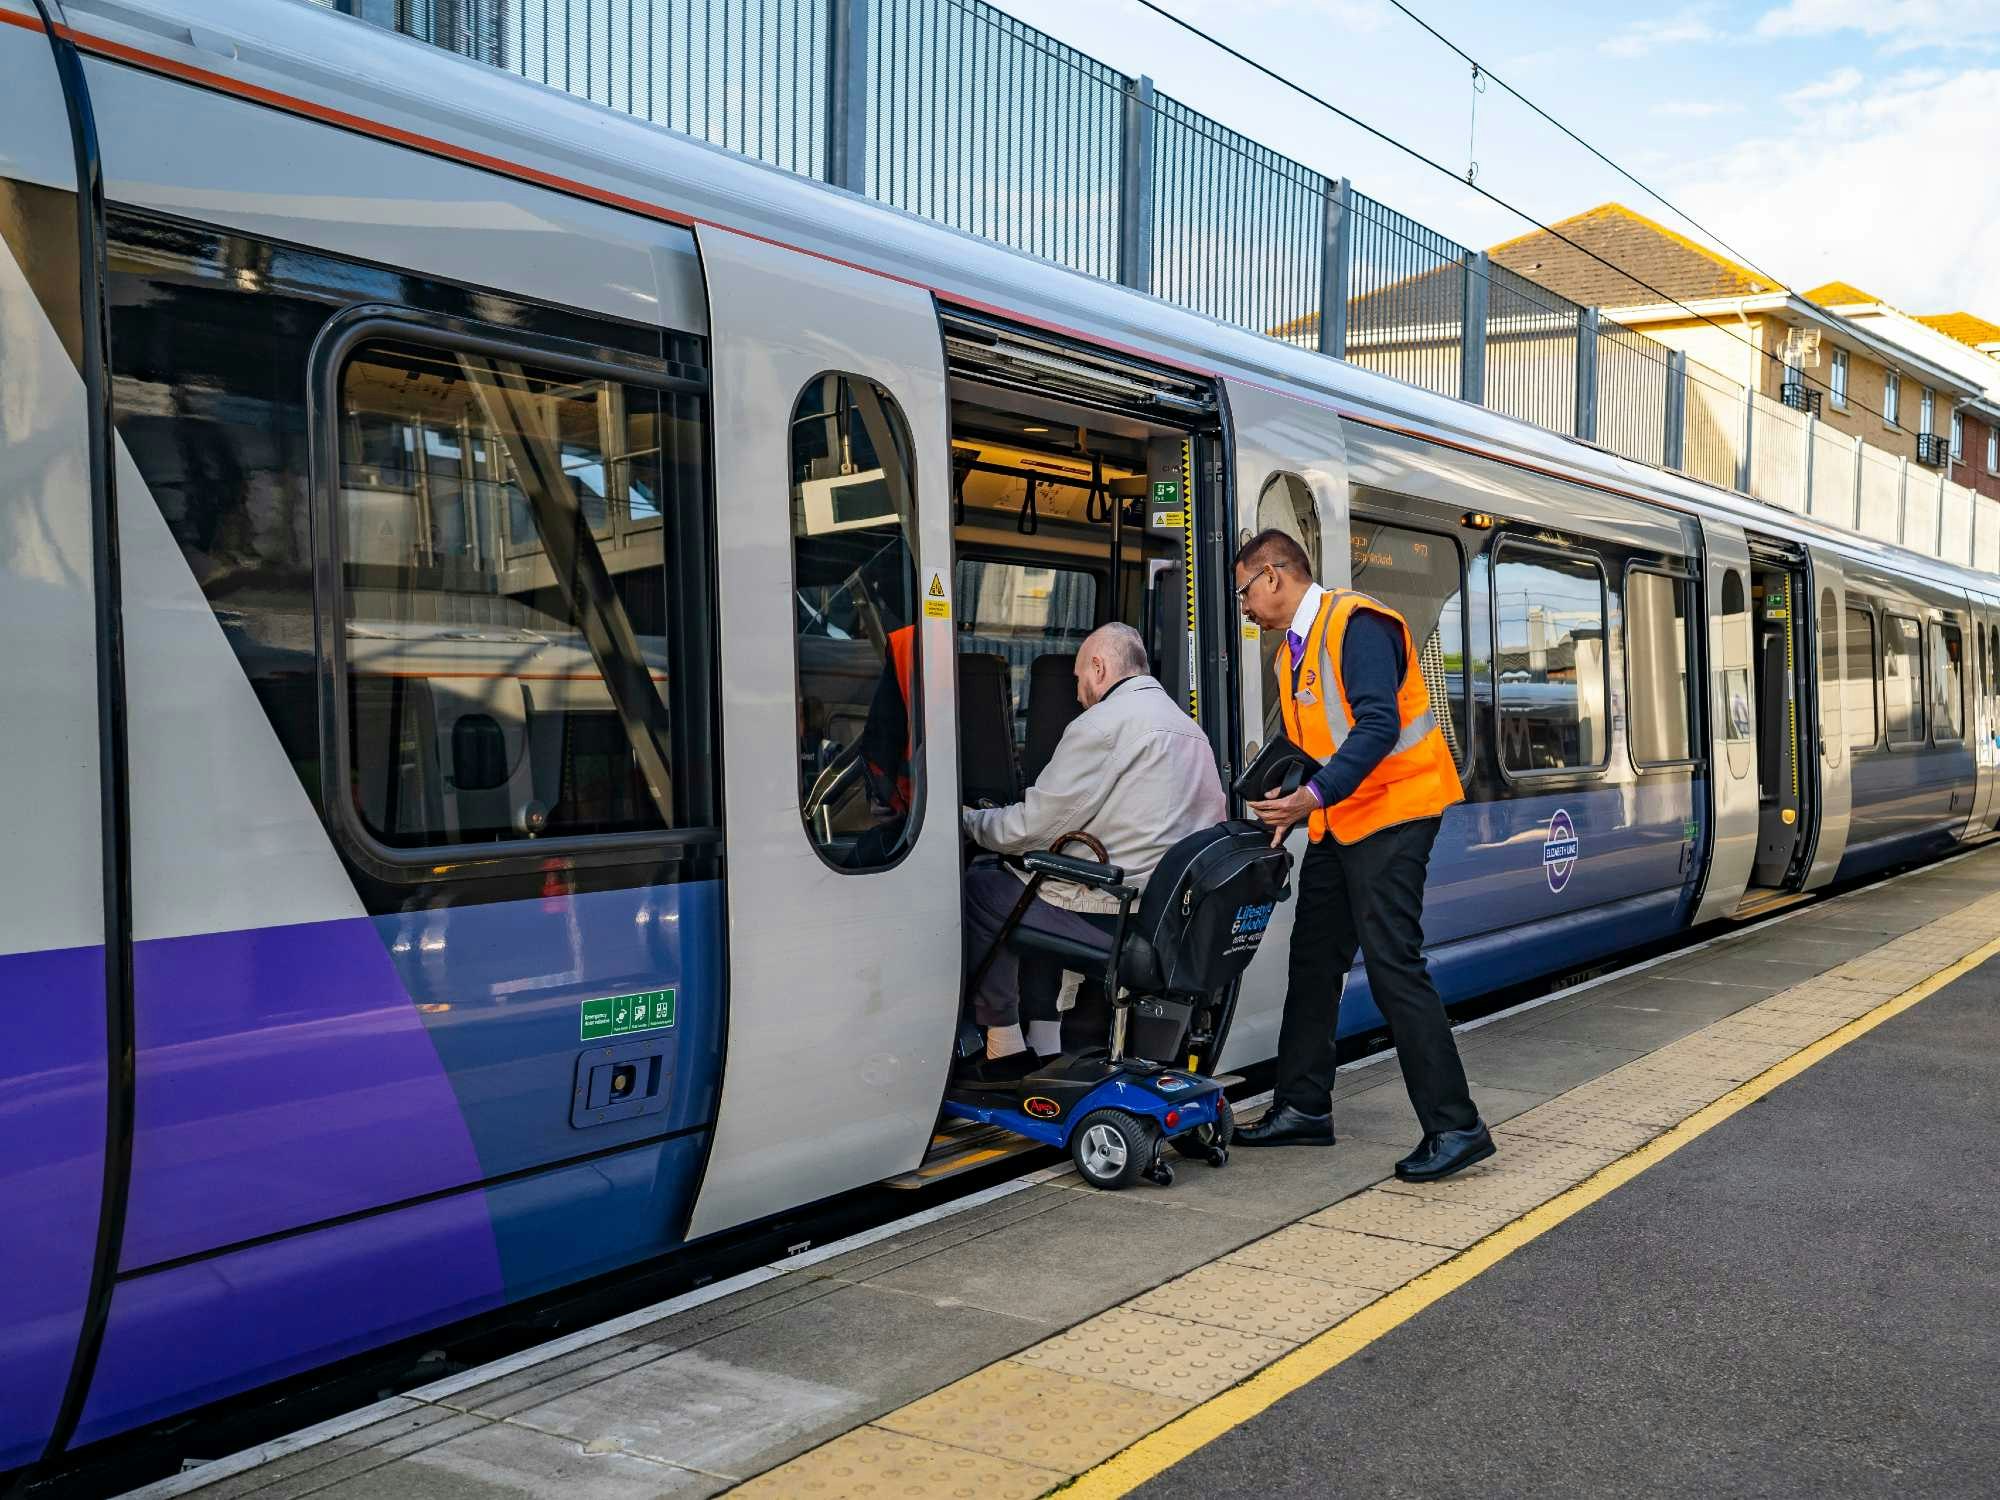 Australia’s public transport system has failed to meet all of its 20-year accessibility targets as people with disability continue to face obstacles due to construction, unsuitable facilities and restrictive public transport options.
